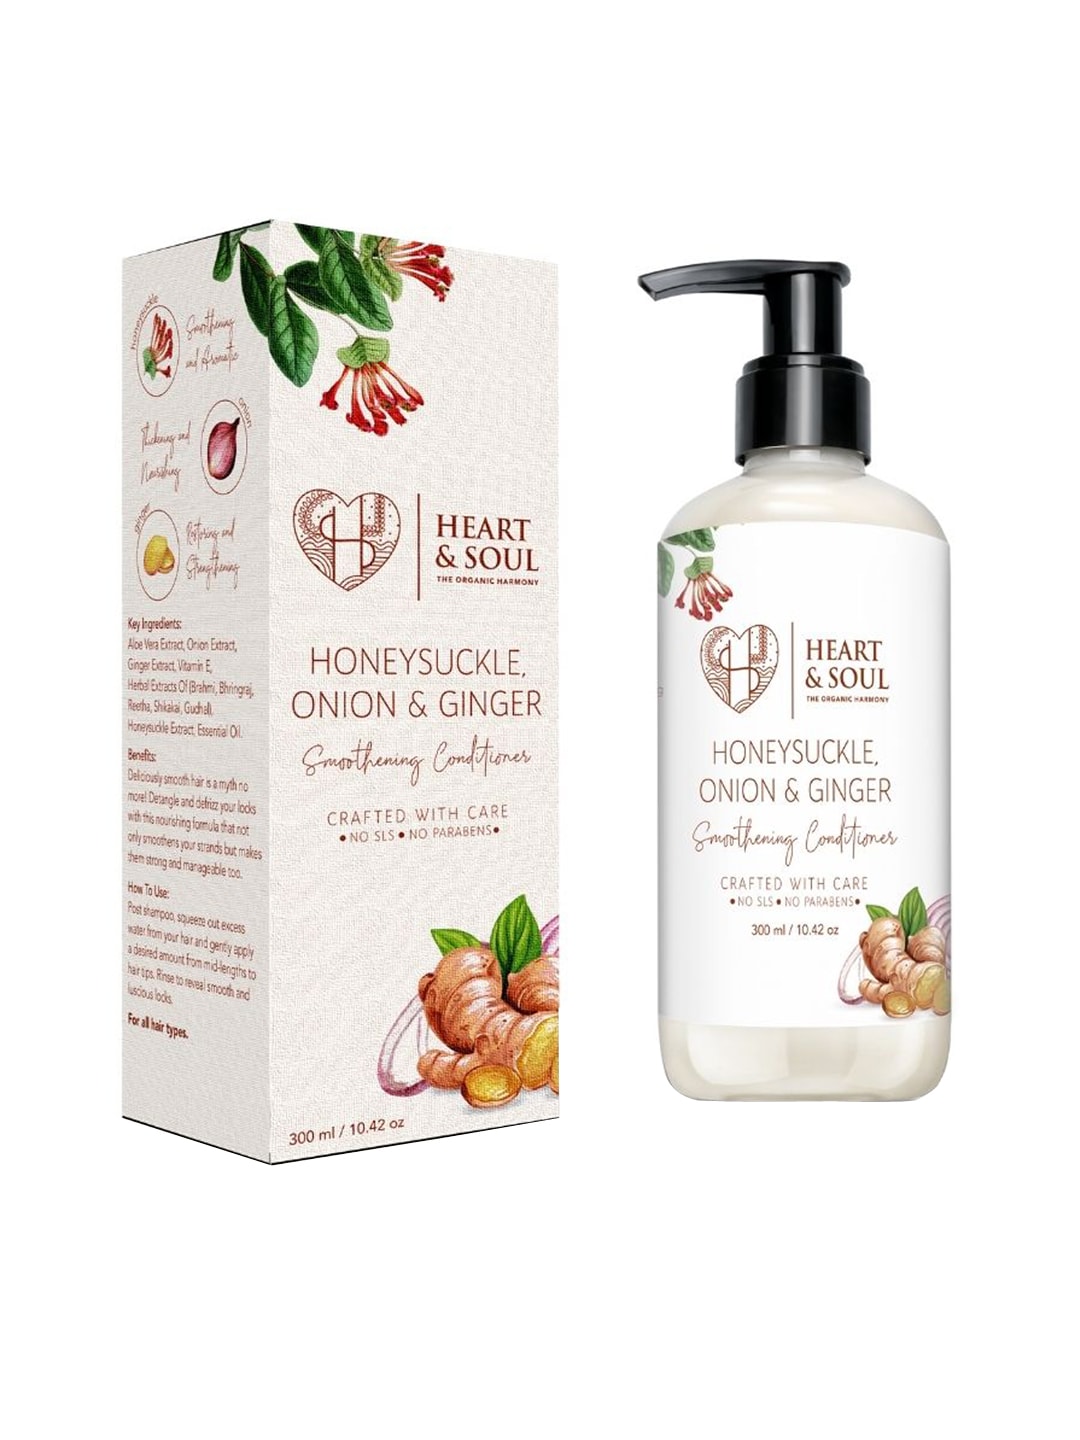 HEART AND SOUL Unisex Honeysuckle, Onion & Ginger Smoothening Conditioner - 300 ml Price in India